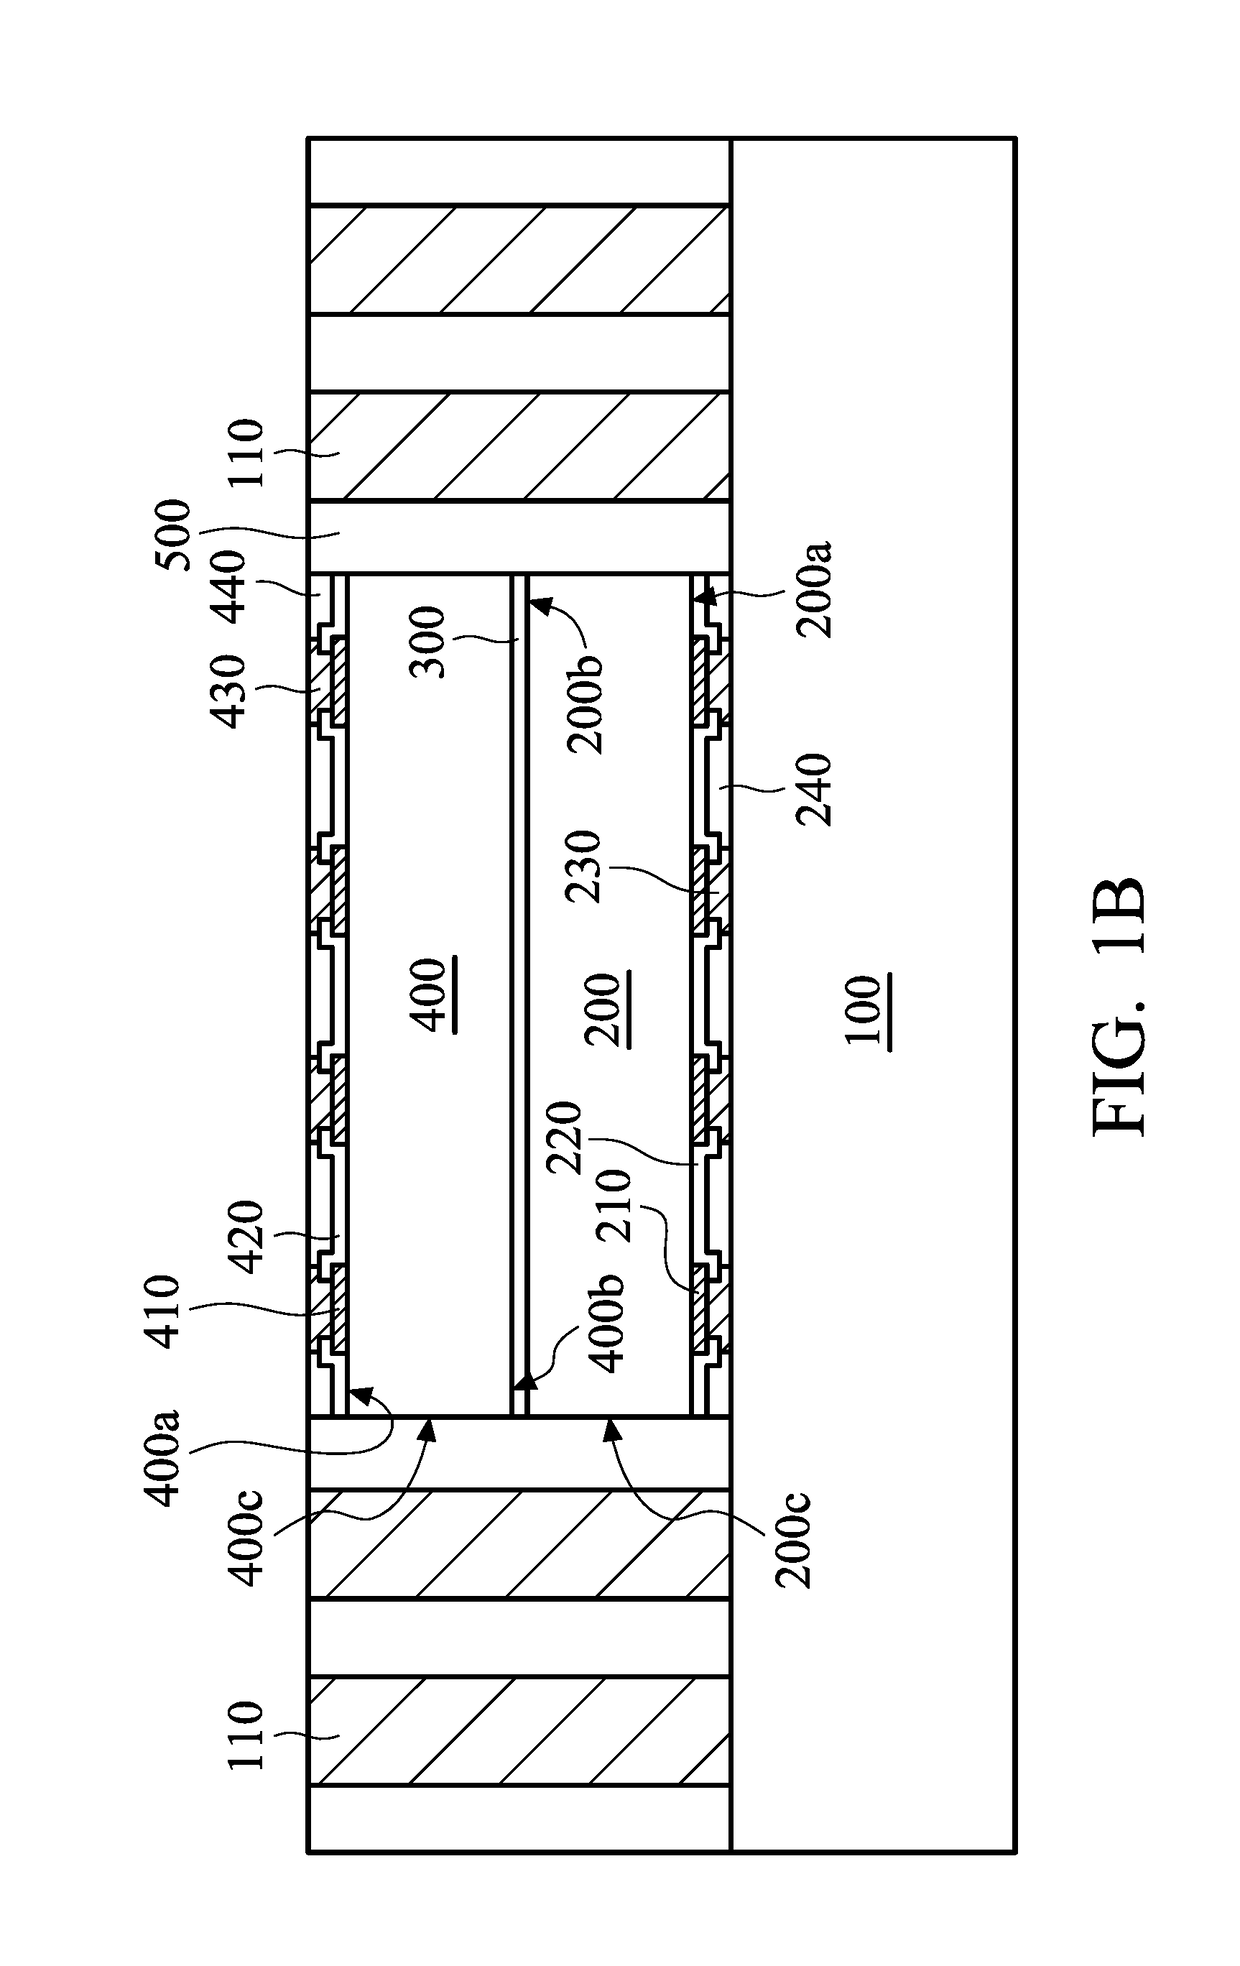 Semiconductor package structure and method for forming the same